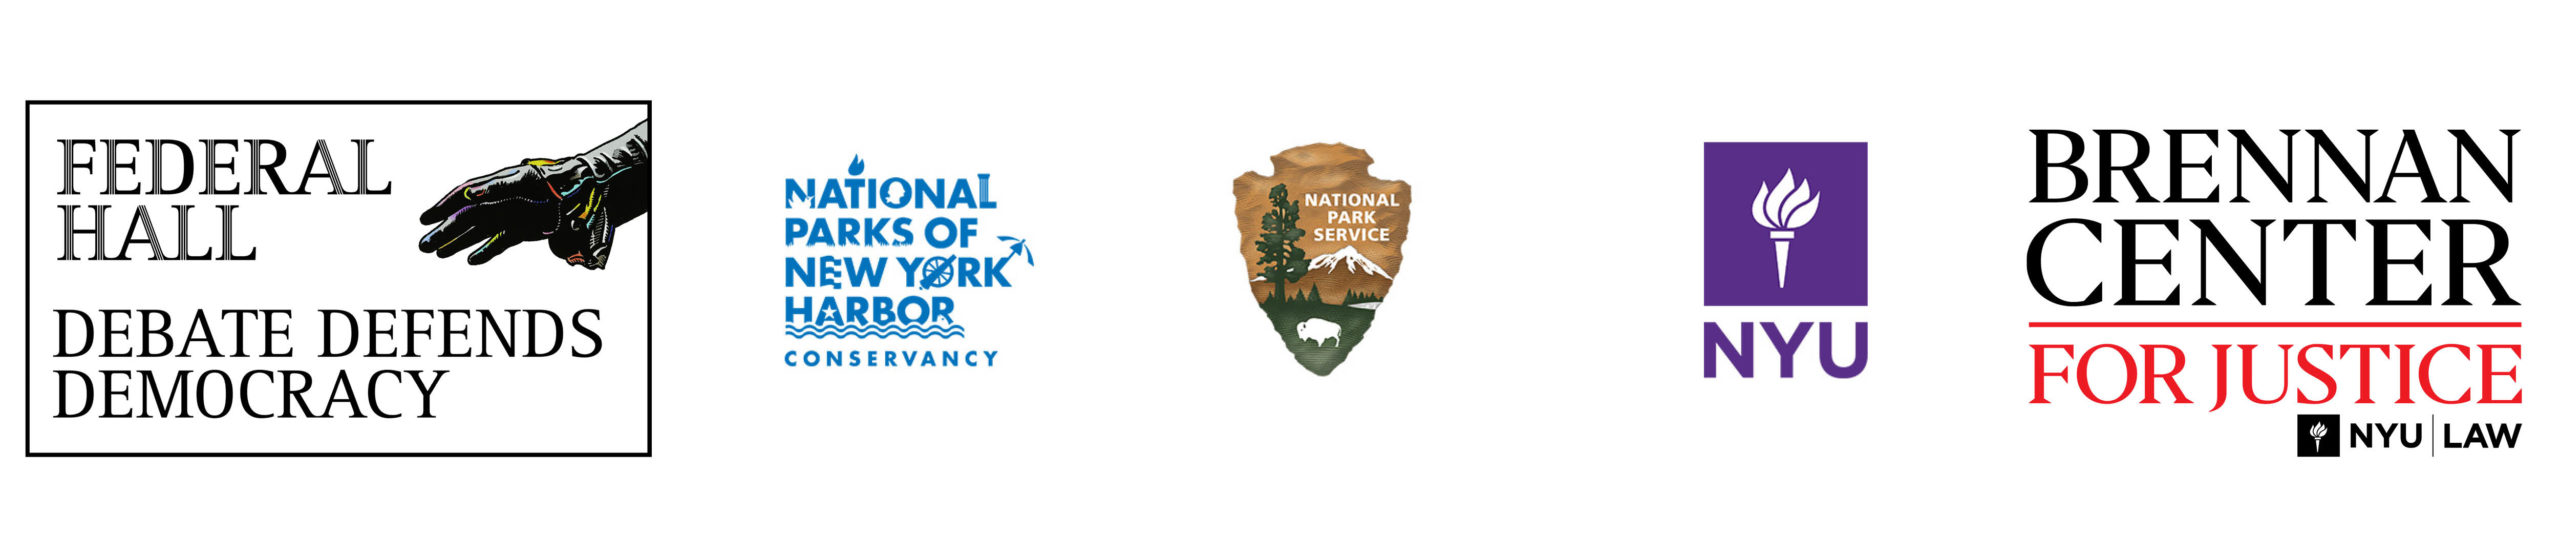 Logos: Federal Hall Debate Defends Democracy, National Parks of New York Harbor Conservancy, National Park Service, NYU, Brennan Center for Justice NYU Law